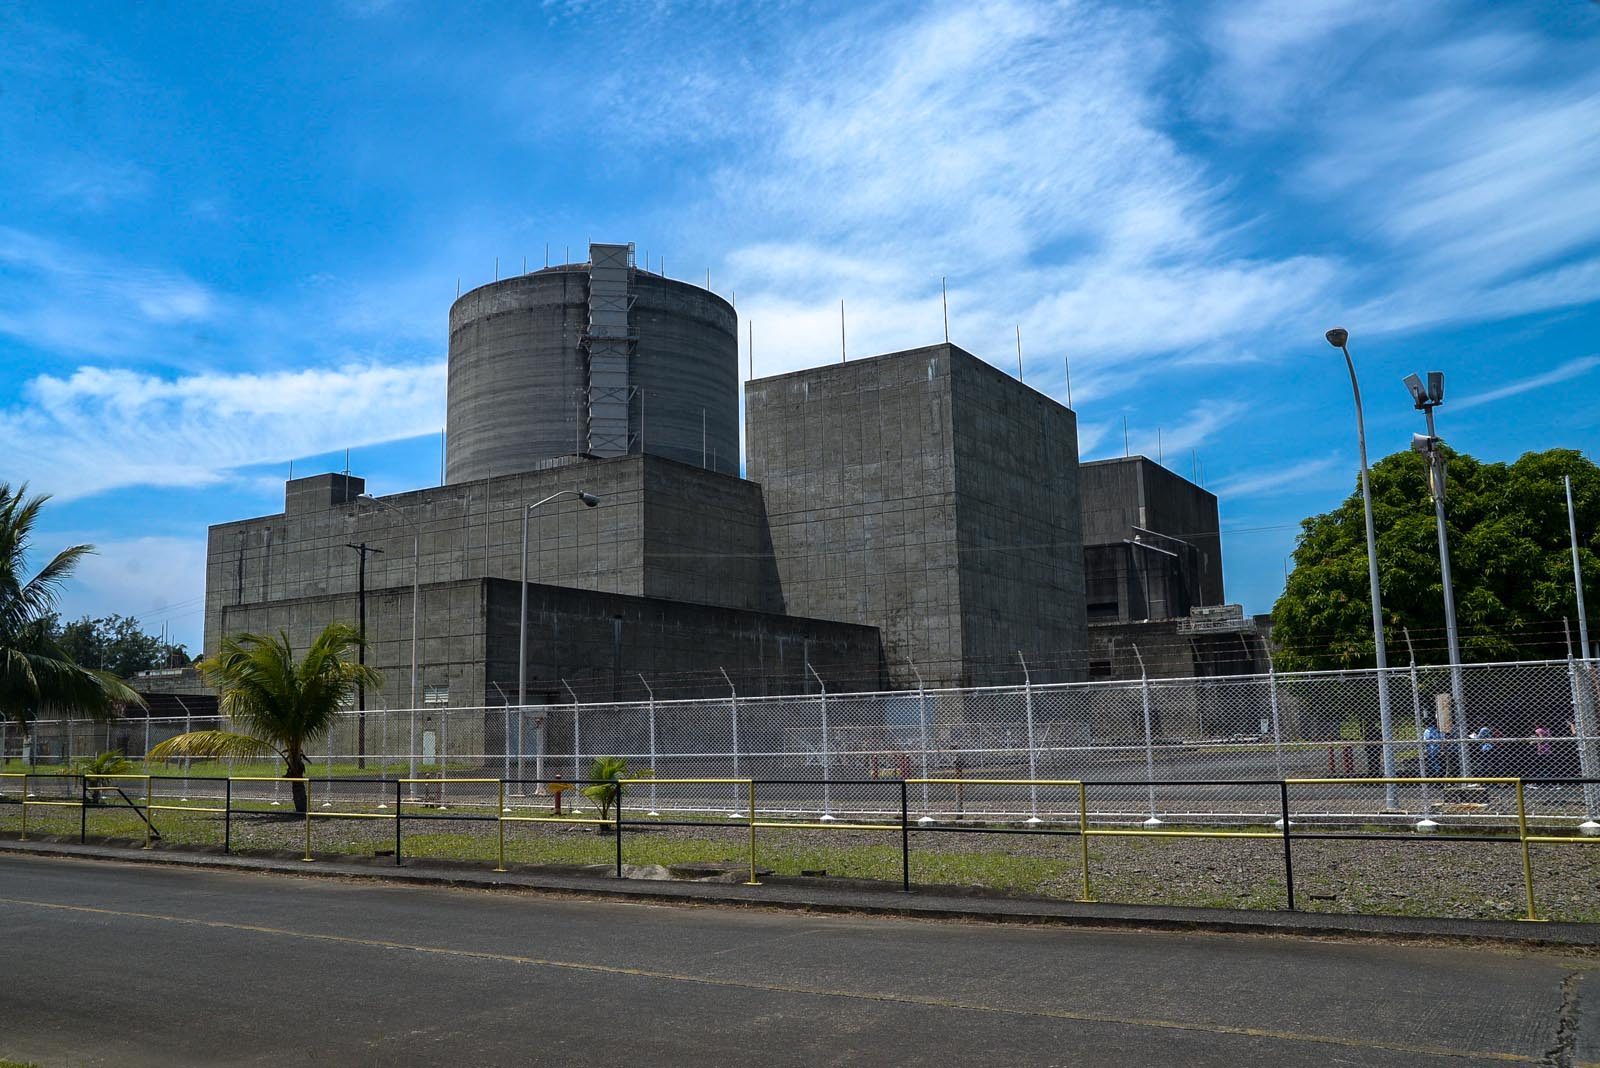 Why revive the Bataan Nuclear Power Plant?